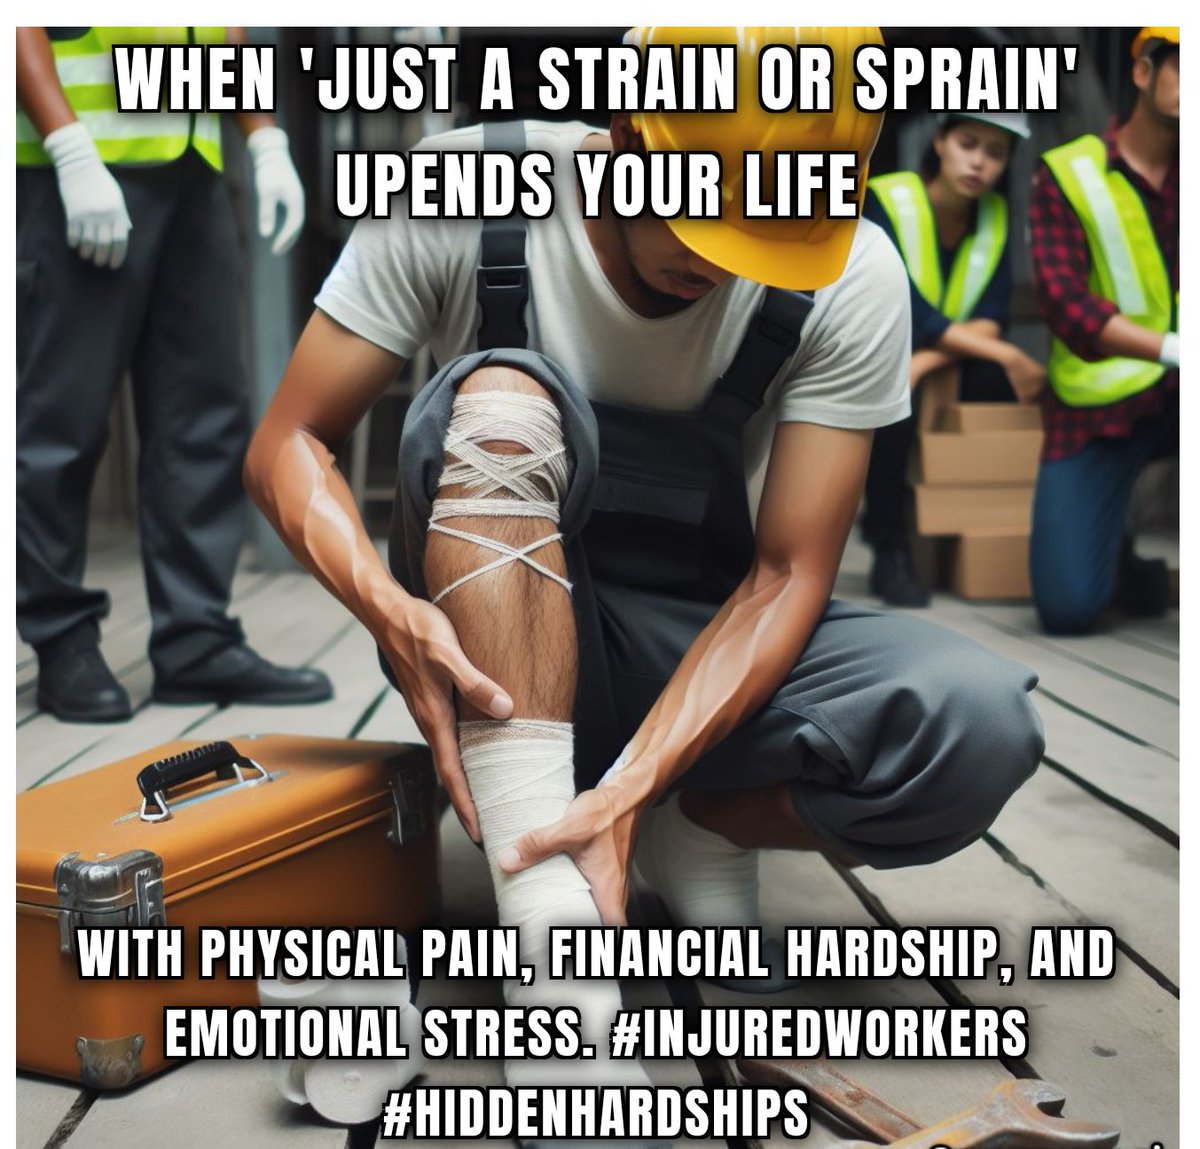 Many injured workers find their lives upended by 'strains and sprains,' facing not just physical pain but also financial and emotional hardships. Let's advocate for better support and understanding of the challenges they face. #WorkersComp #InjuredWorkers #wsib #wcb